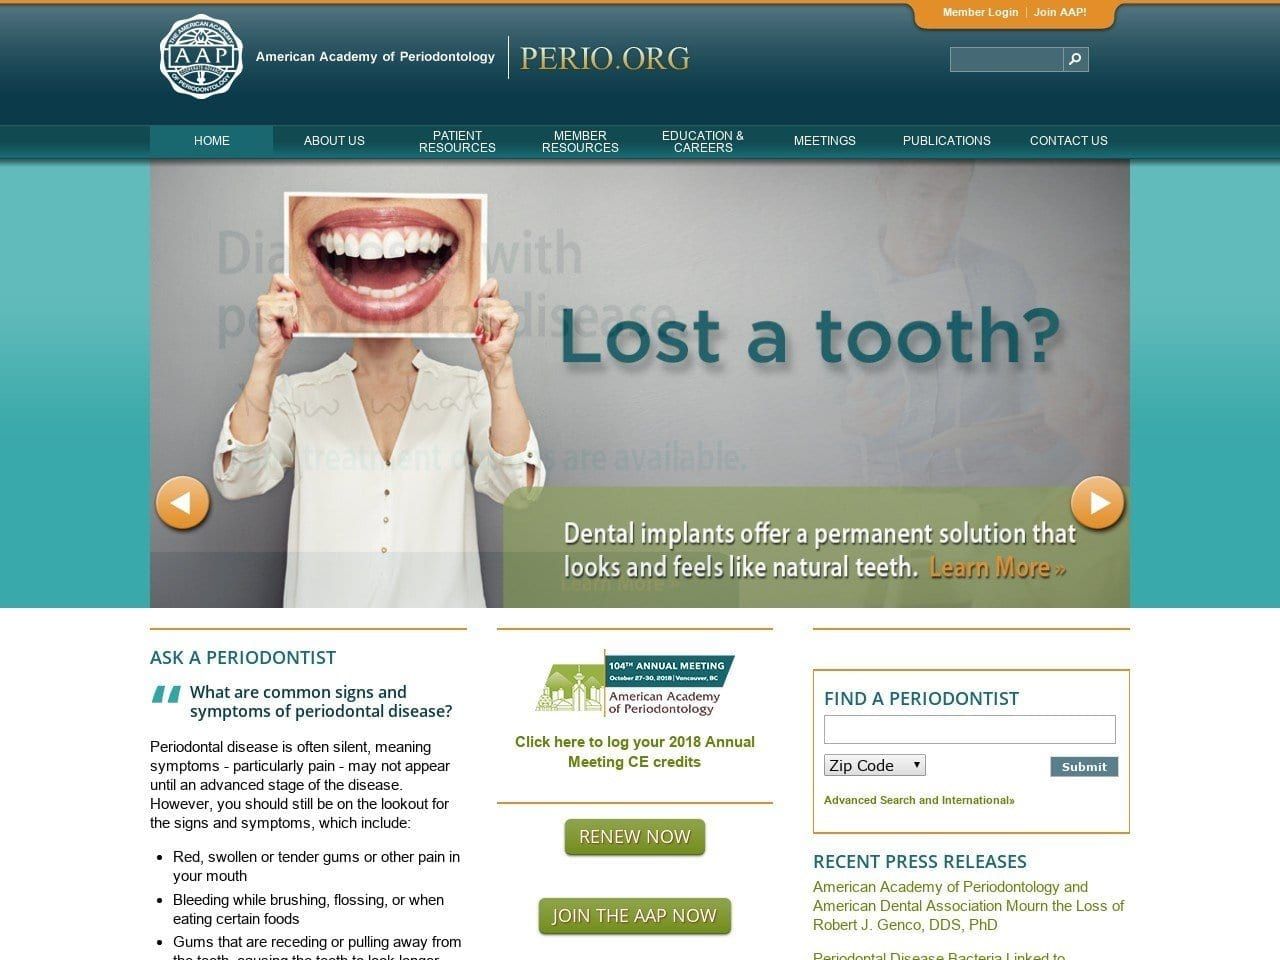 Amer Academy of Periodontology Website Screenshot from perio.org